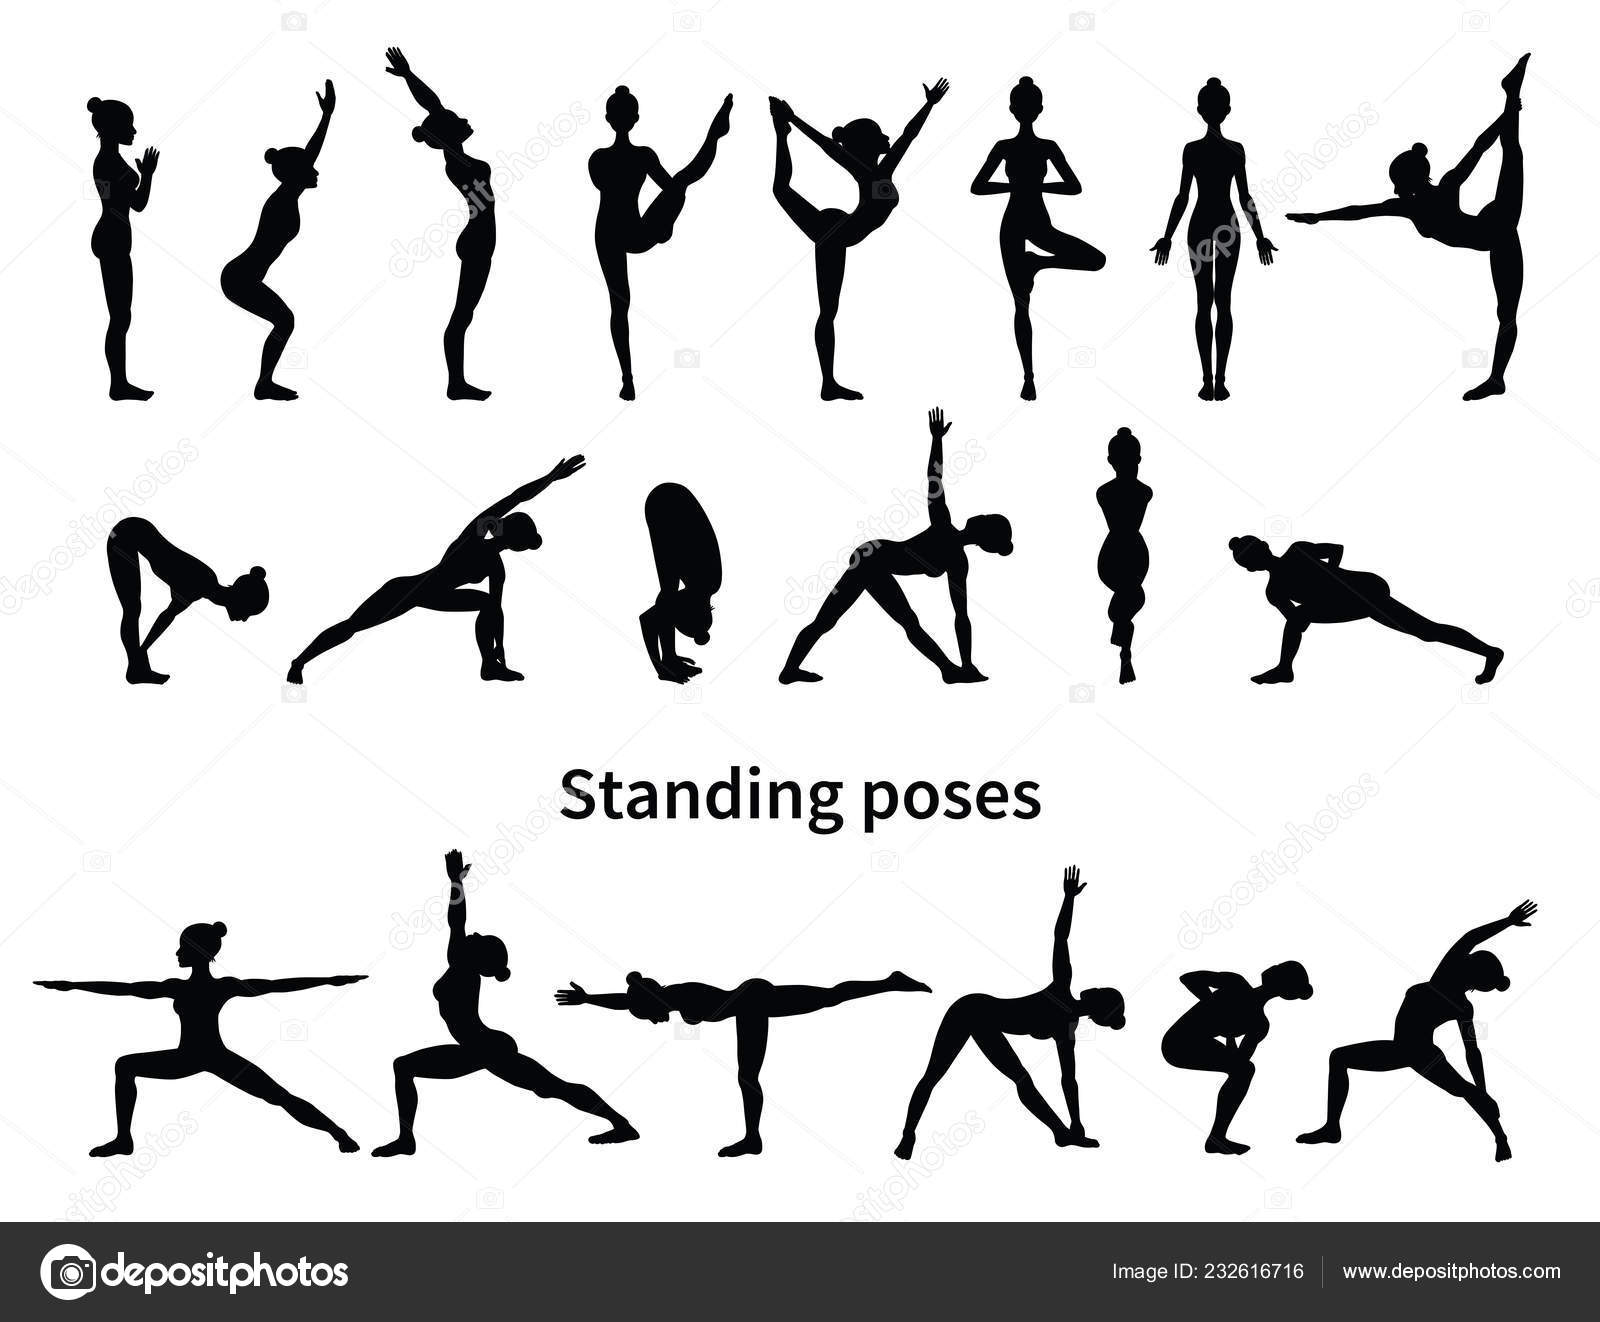 Infographic Of 8 Standing Yoga Poses For Easy Yoga At Home In Concept Of  Flexibility In